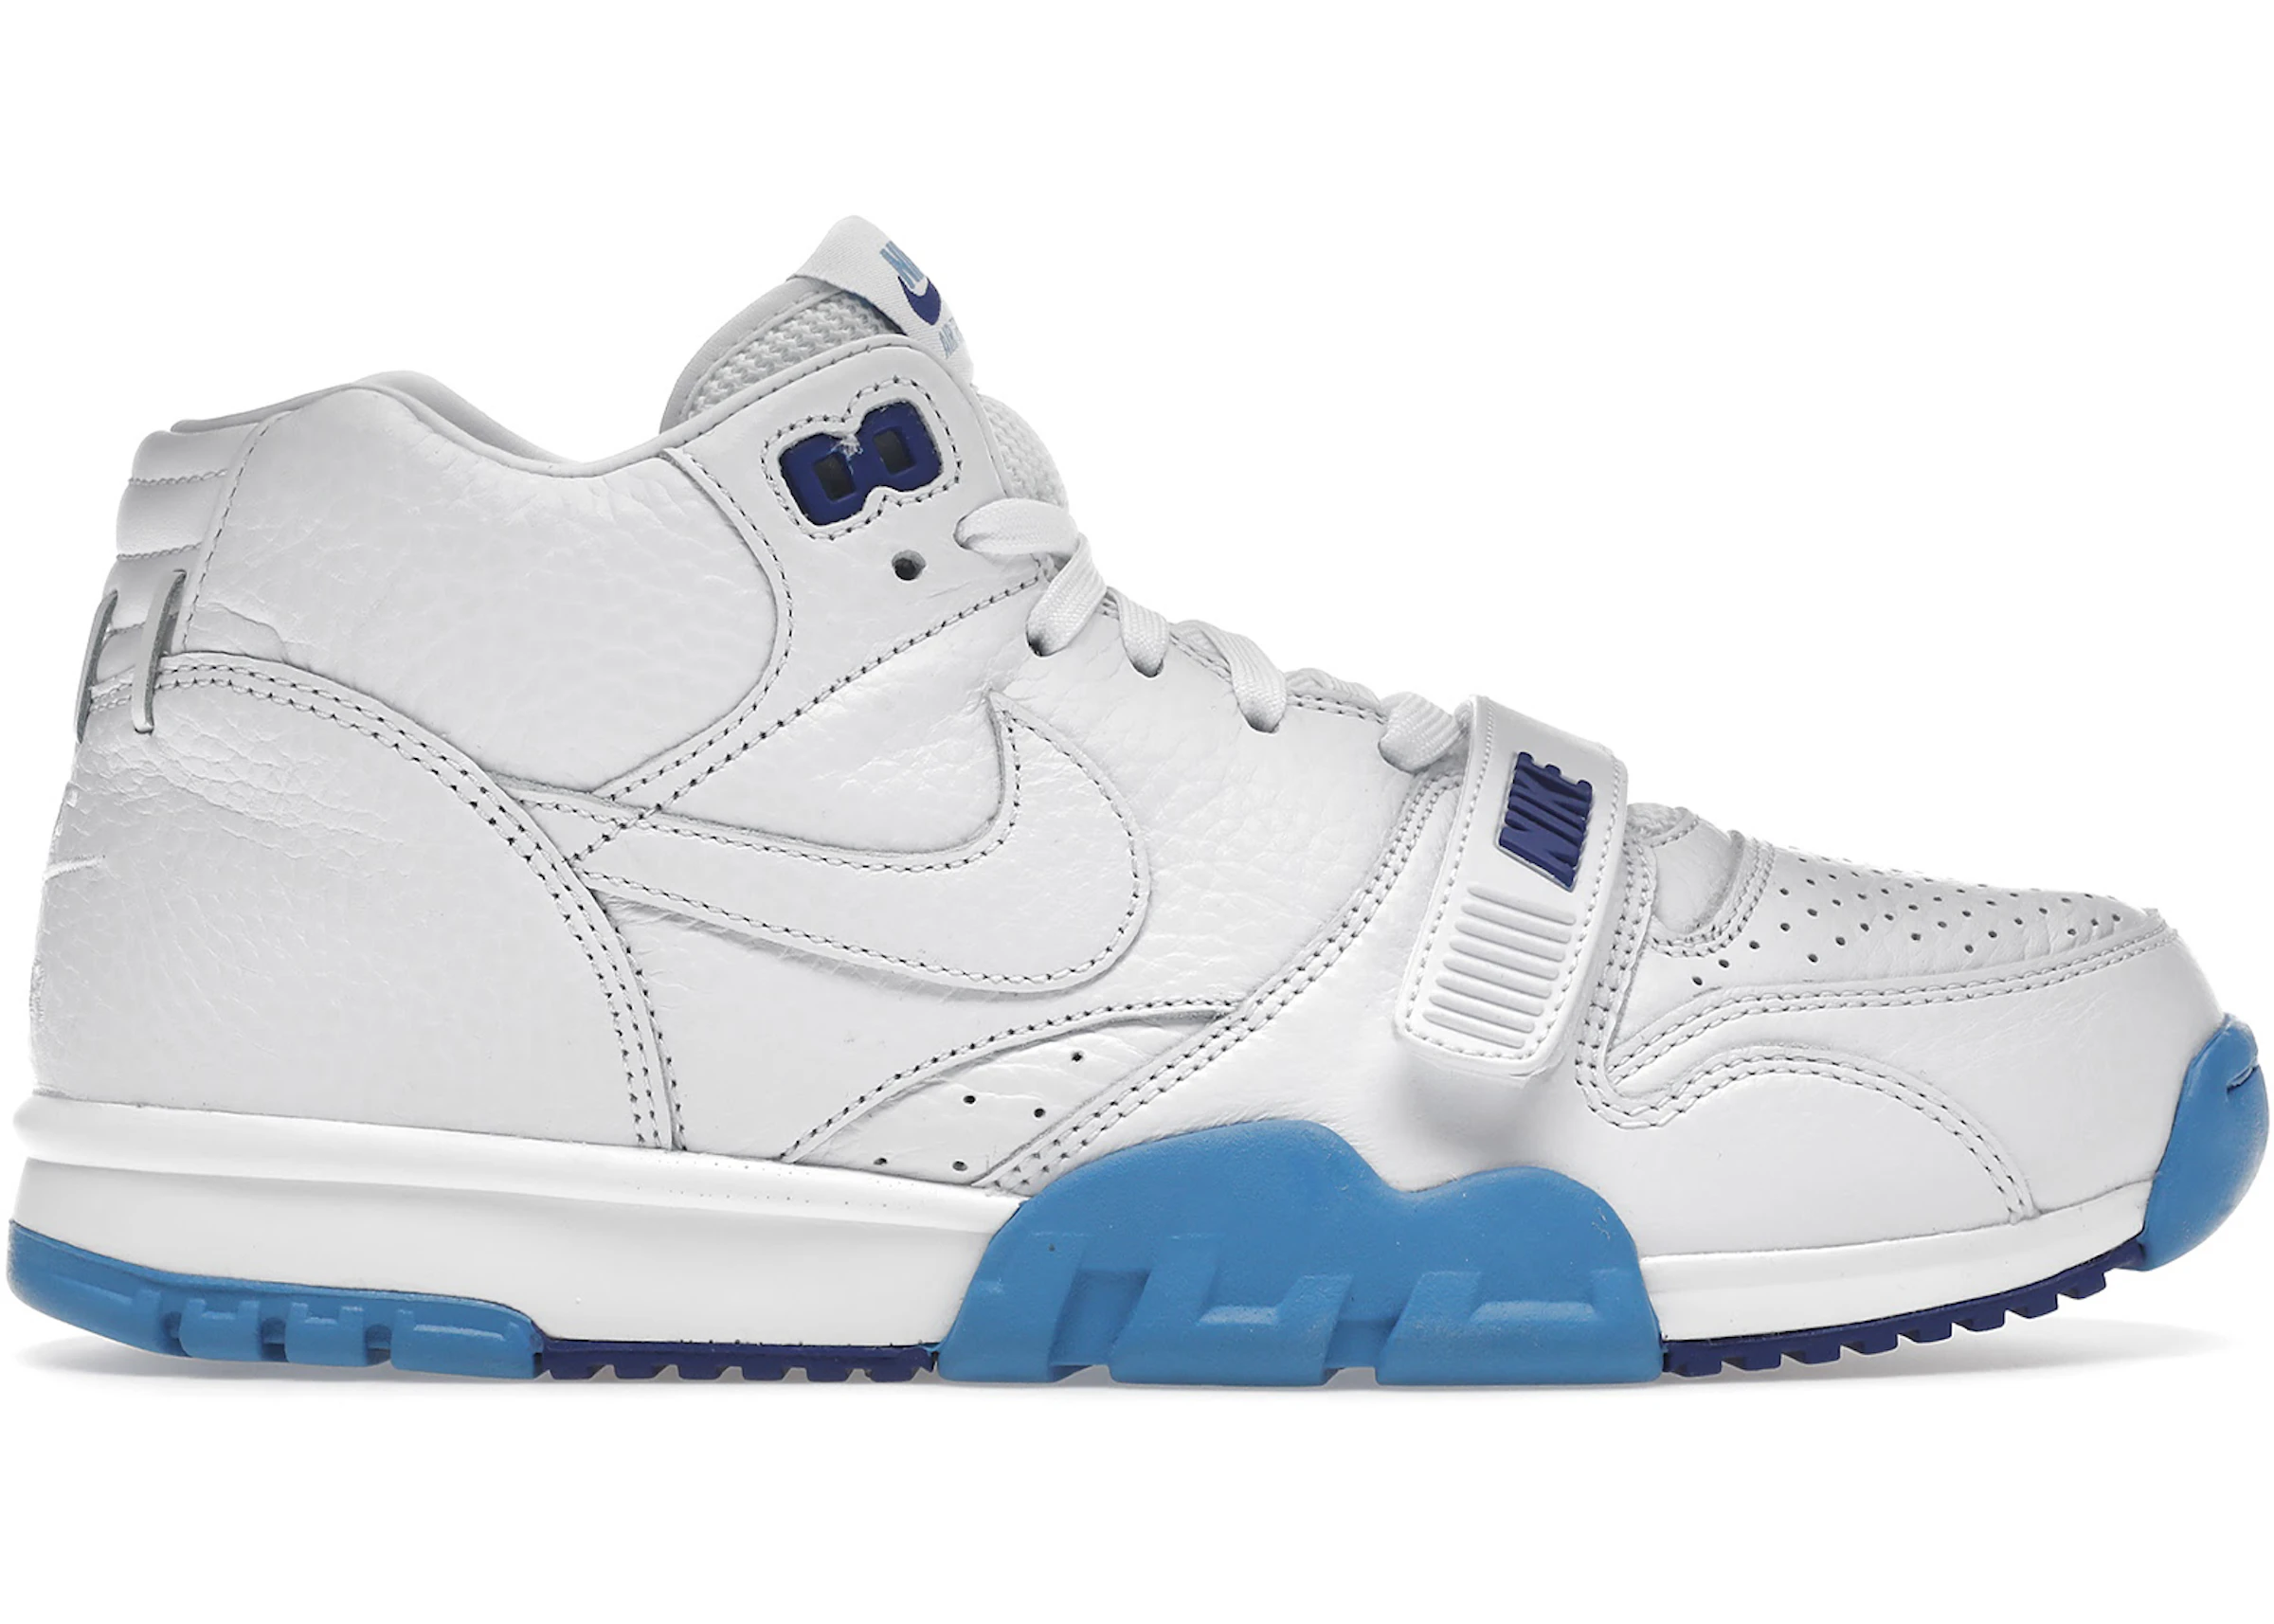 Nike Air Trainer 1 Don't I Know You? - DR9997-100 - IT